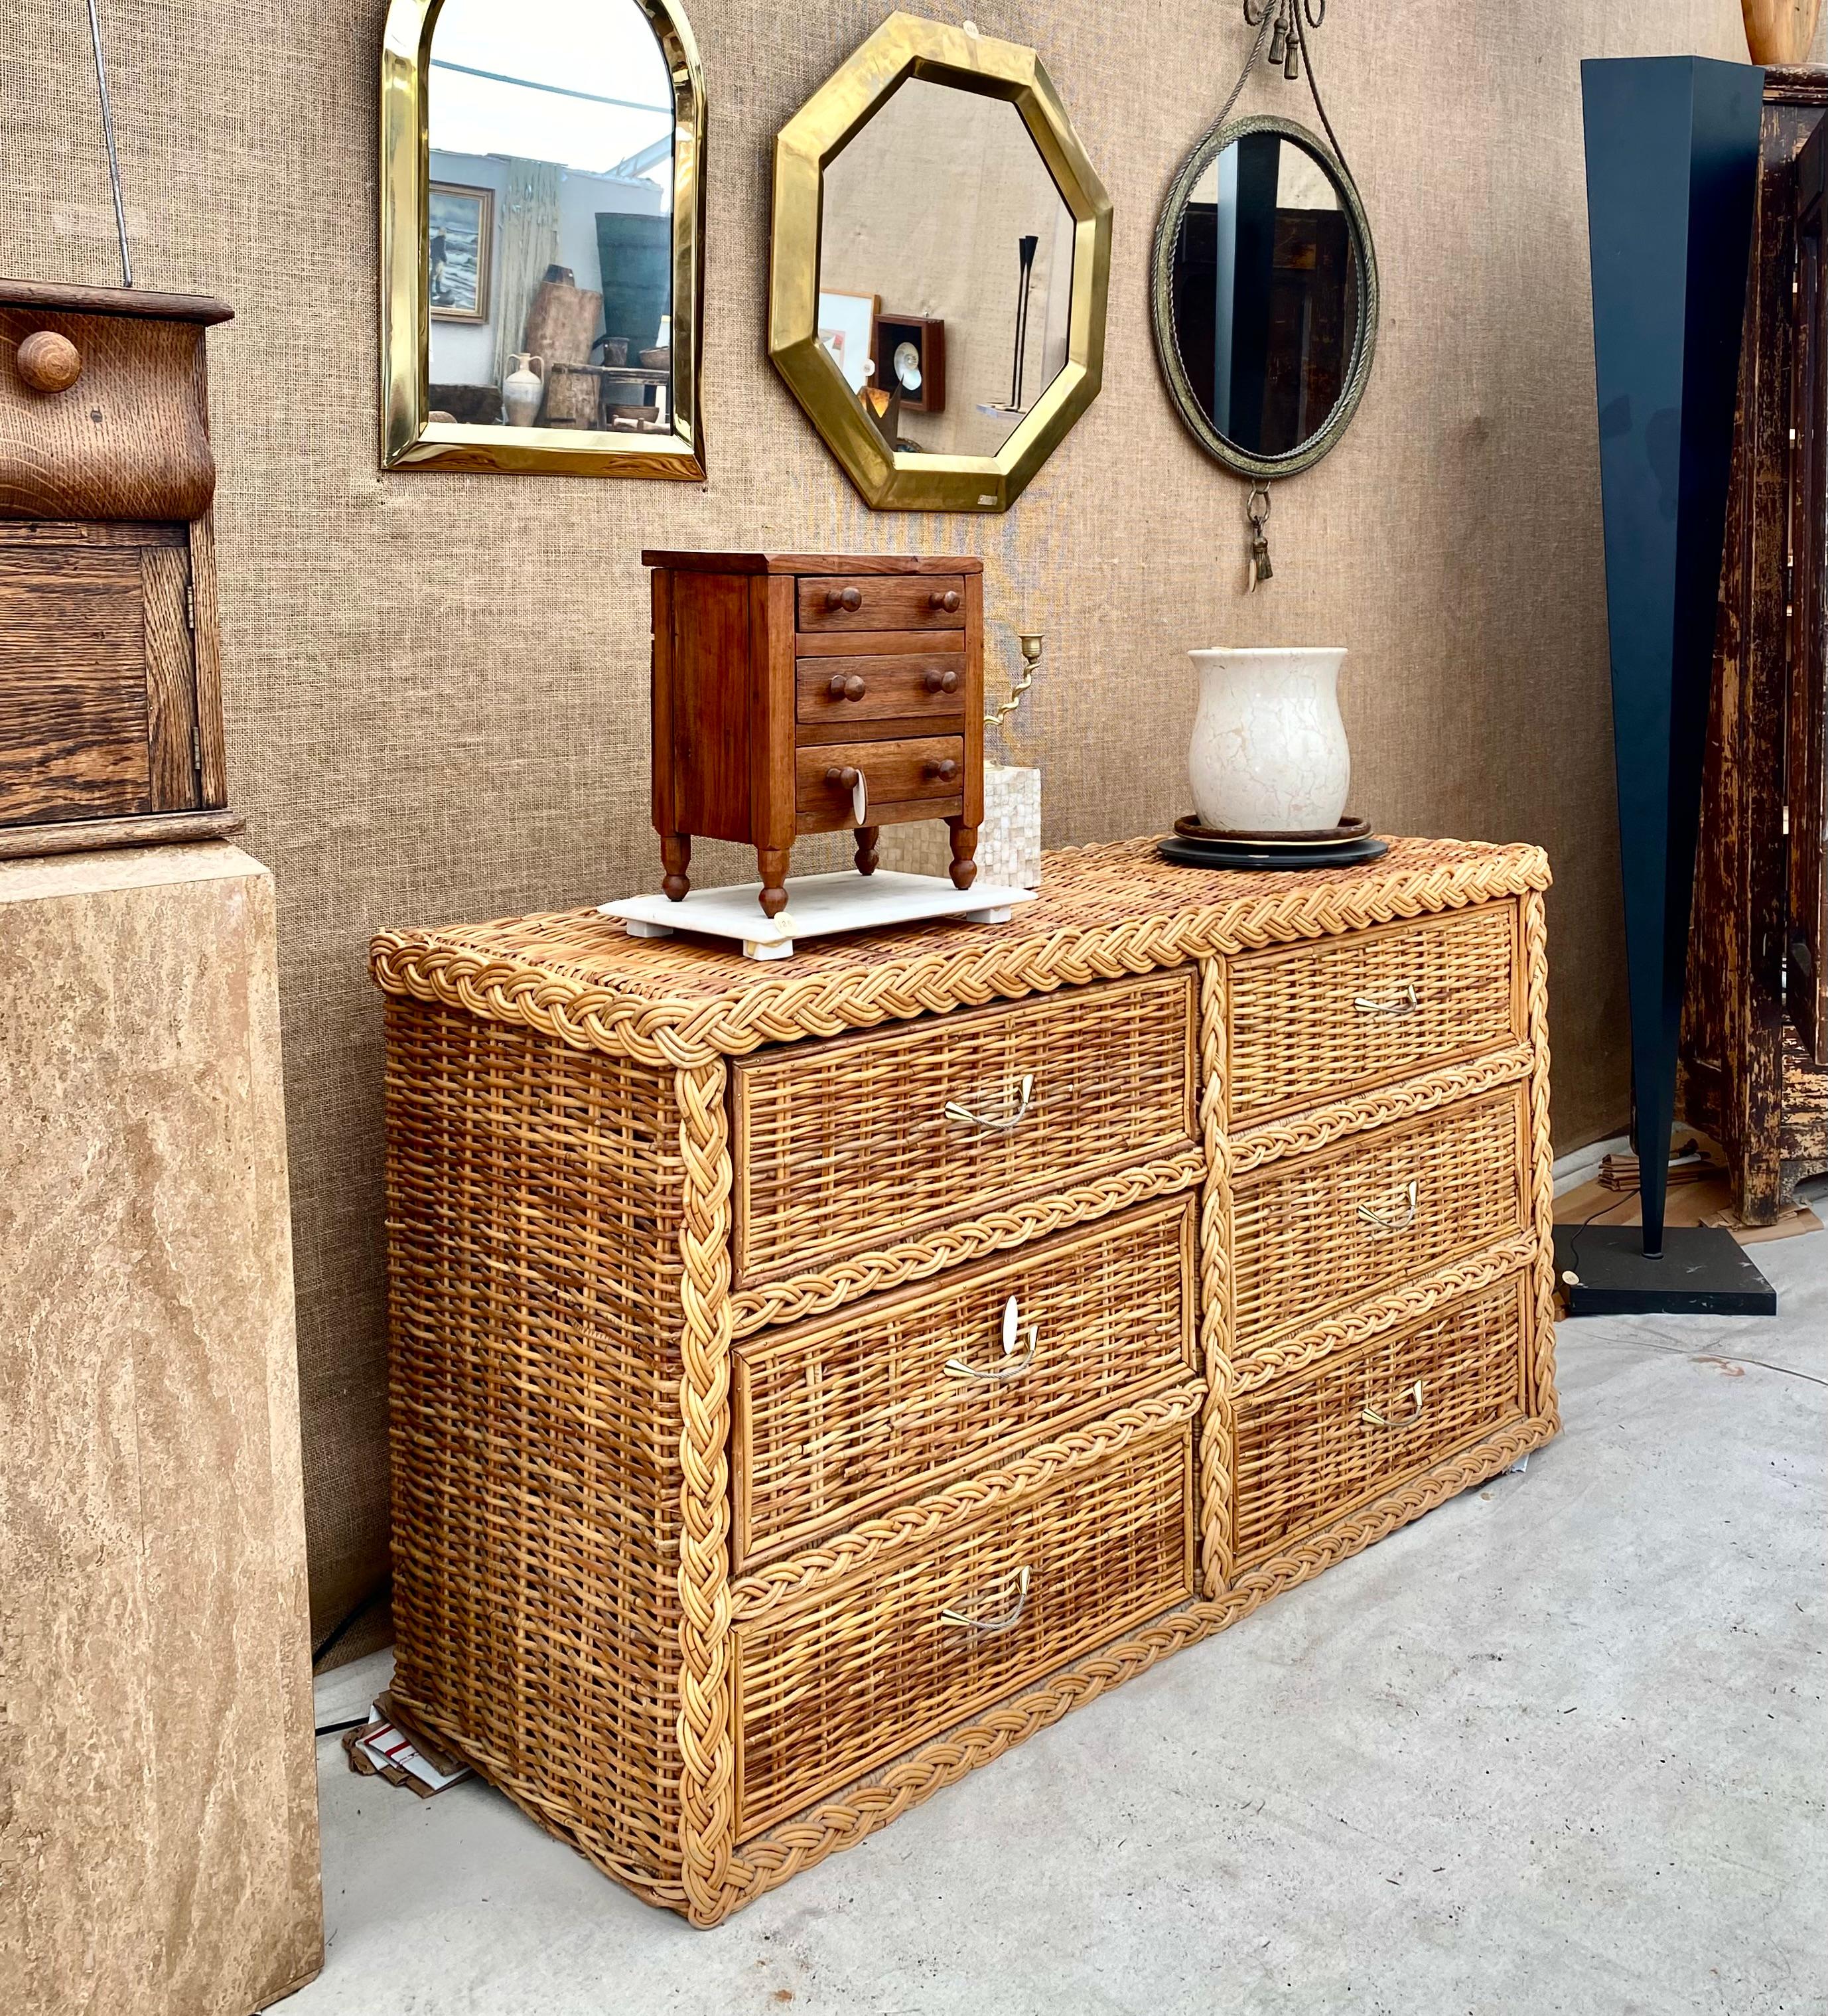 Charming woven rattan 6 drawer dresser with braided detailing and a finished back. 

Great piece that blends American chic, while referencing a British Campaign style, in natural textures and materials that surround a sturdy wood frame. Really